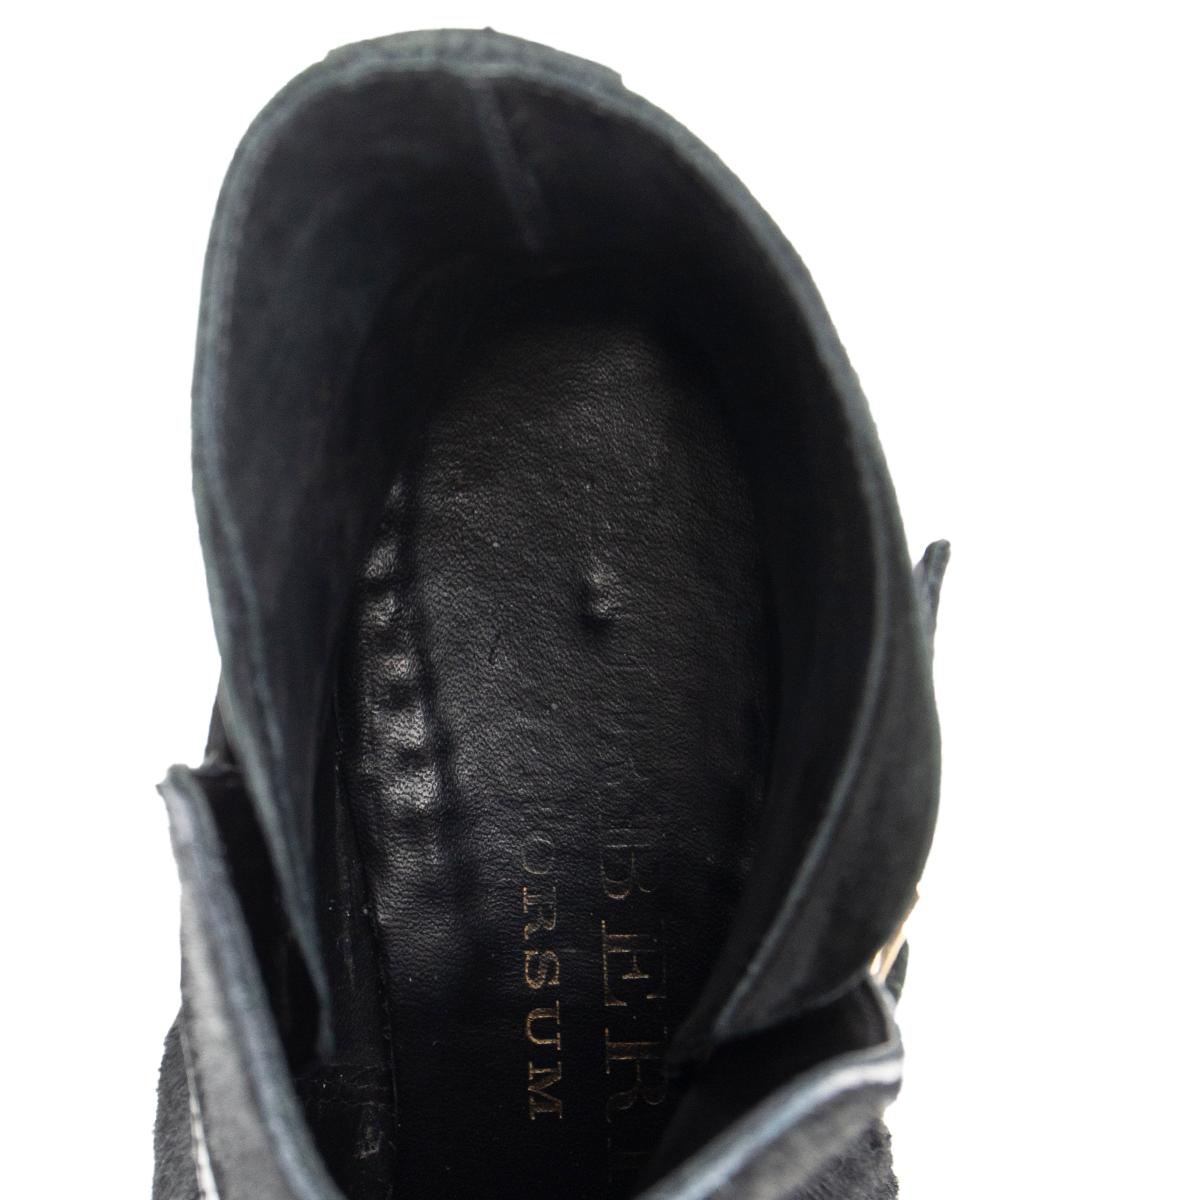 Black BURBERRY PRORSUM black CALF HAIR & LEATHER STUDDED ESKDALE Boots Shoes 37.5 For Sale